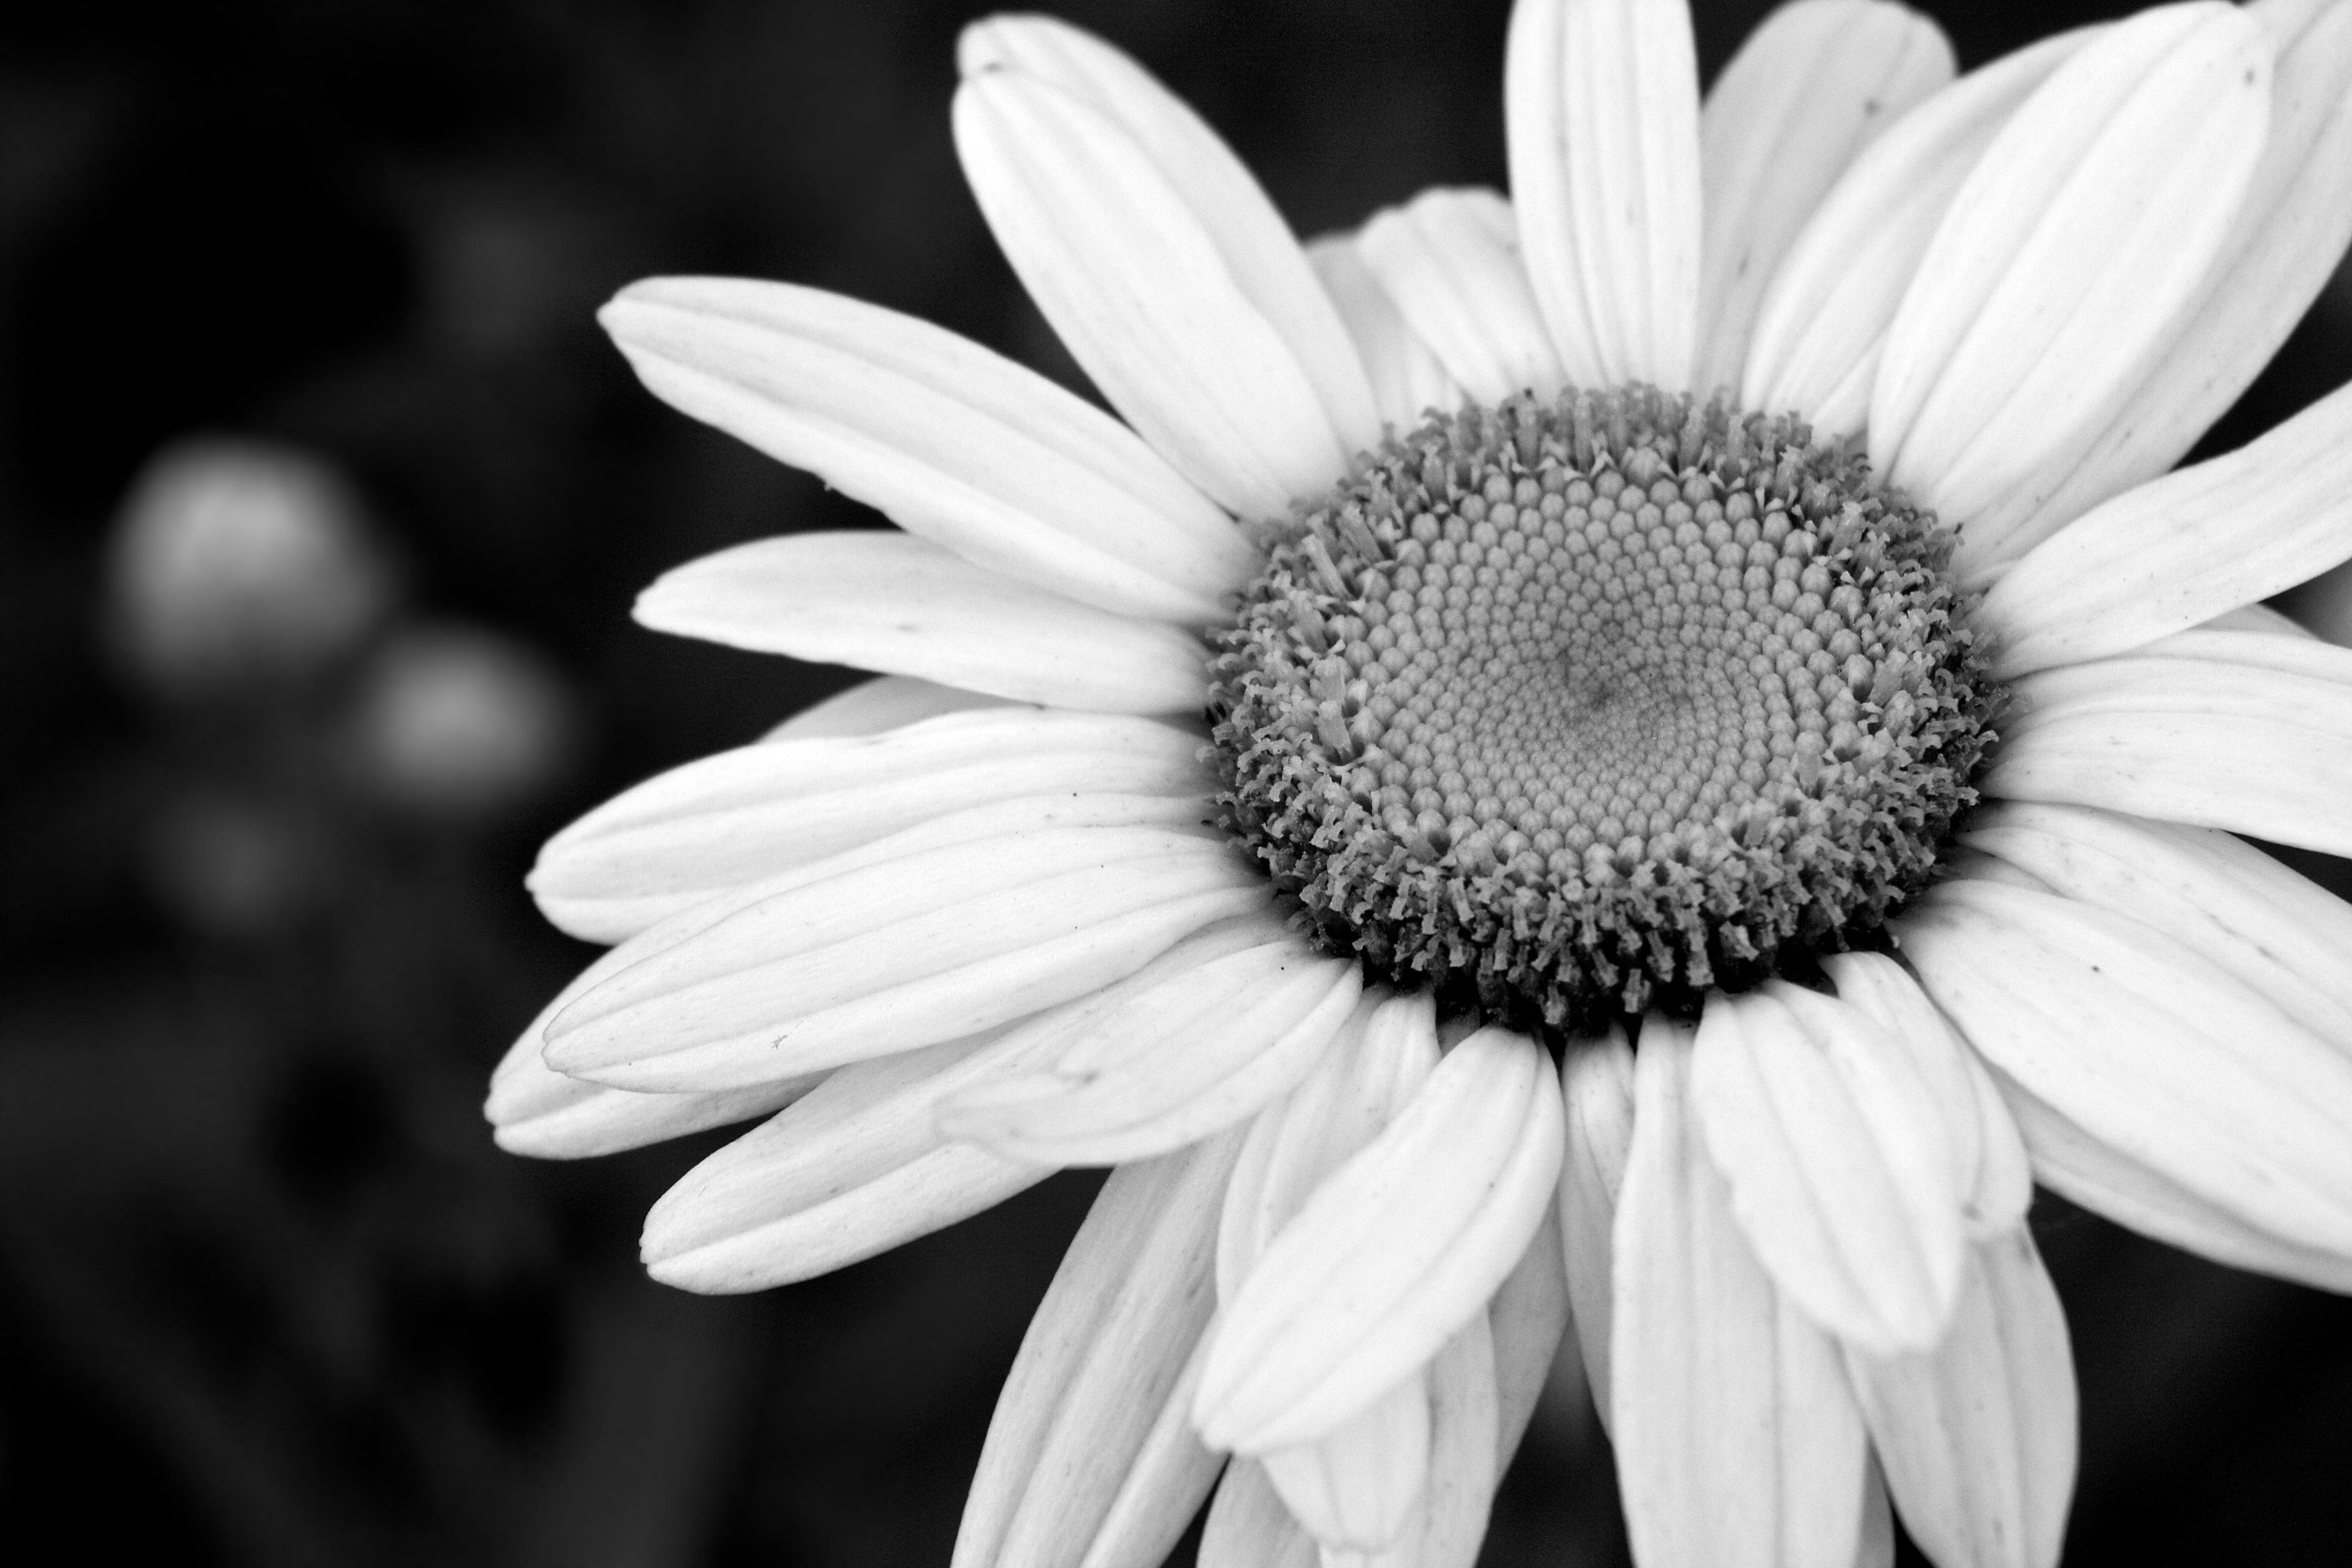 Black And White Daisy Tumblr Wallpapers - Wallpaper Cave